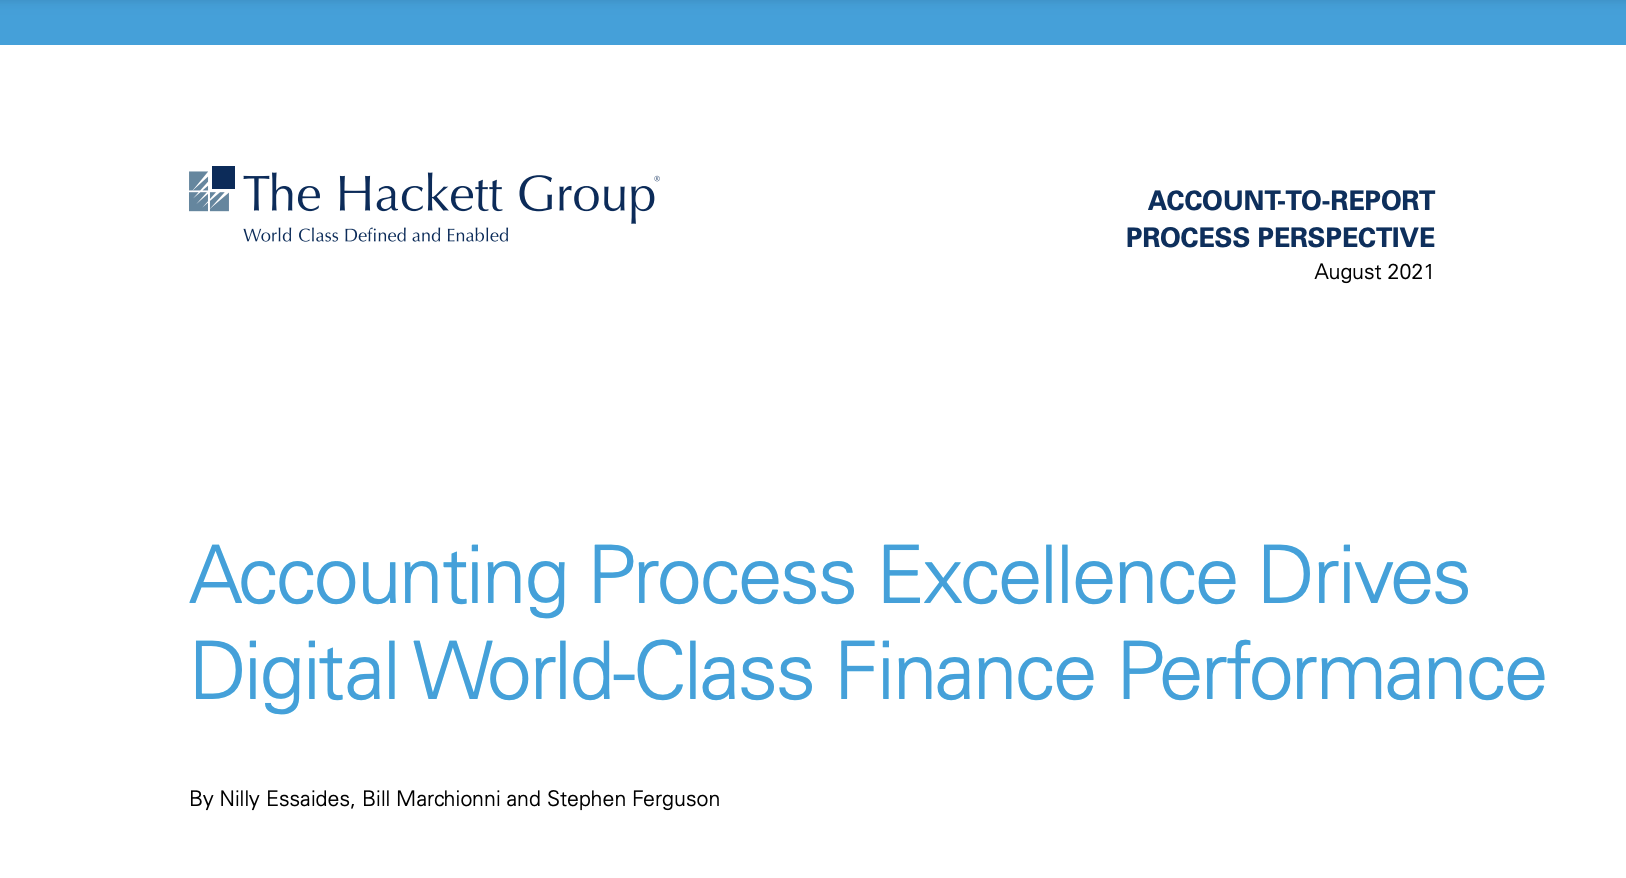 The Hackett Group: Accounting Process